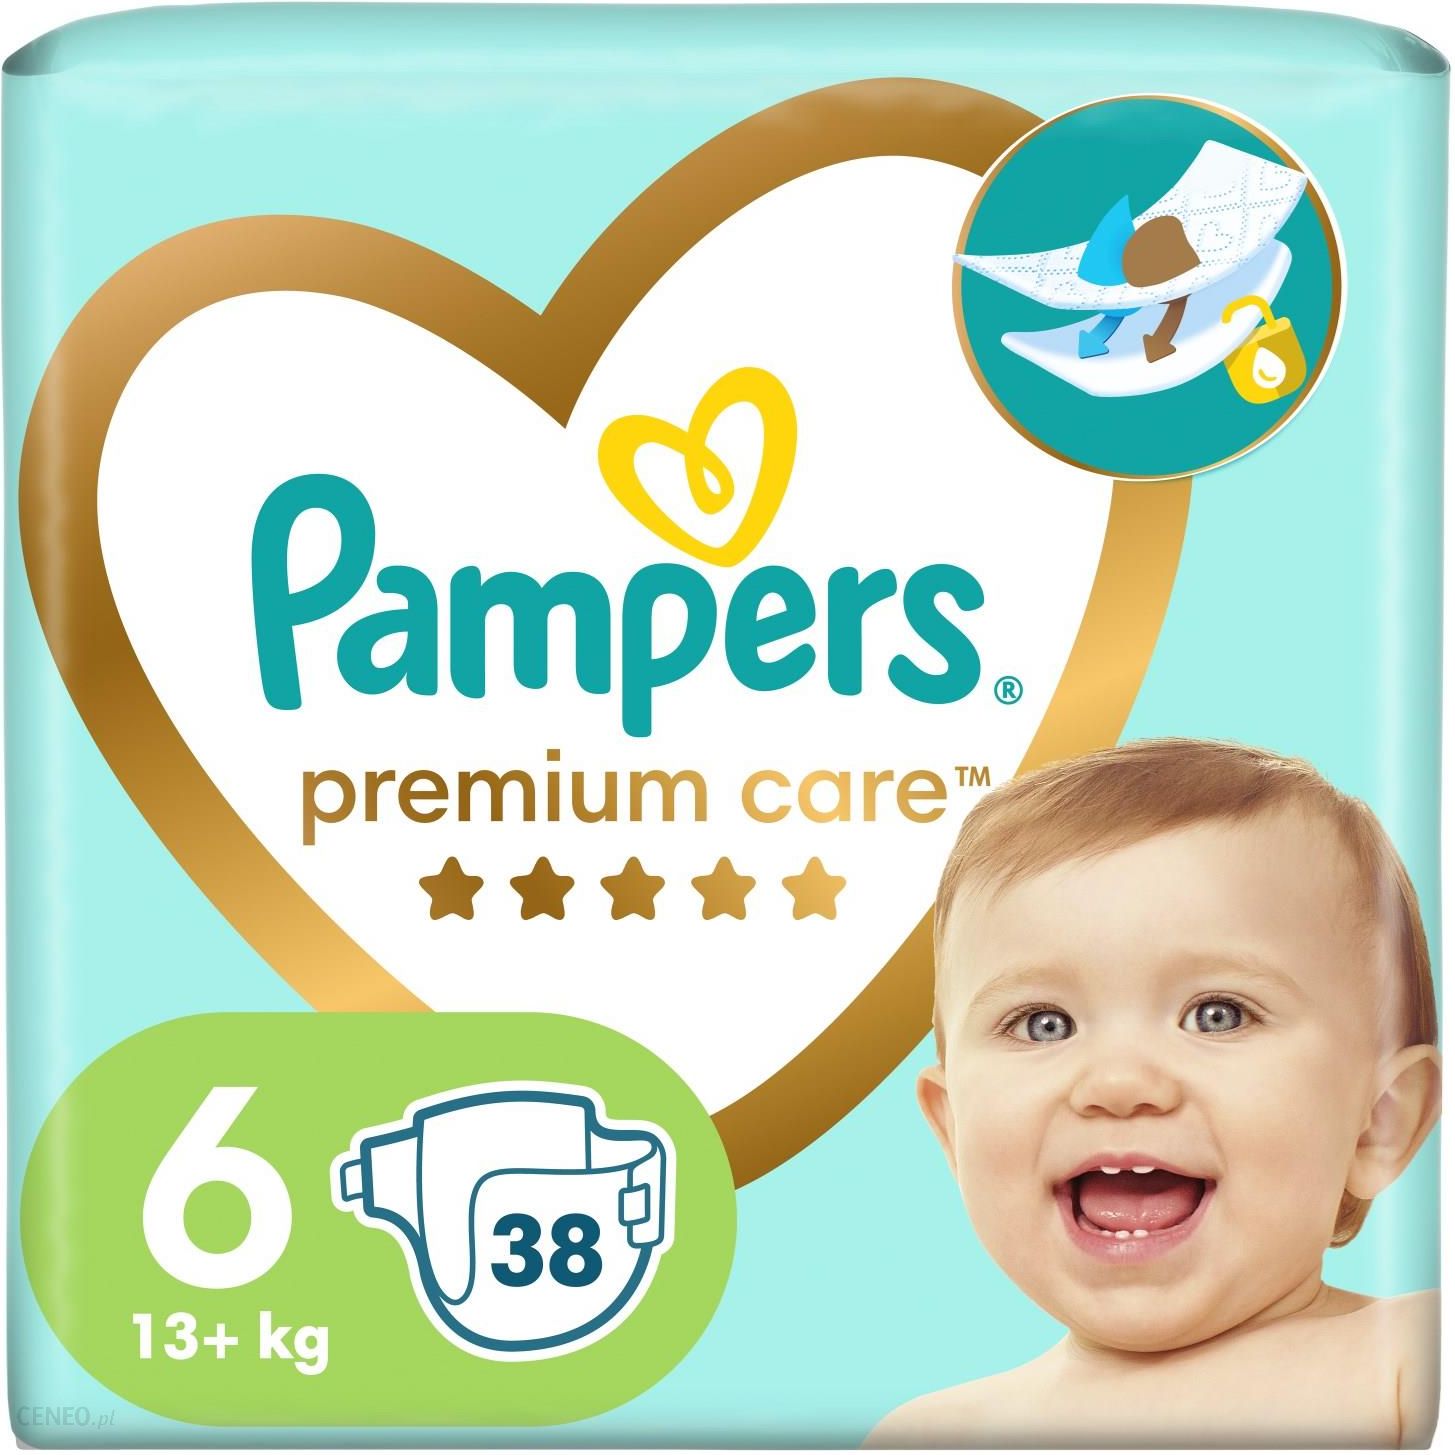 pampers epson l3150